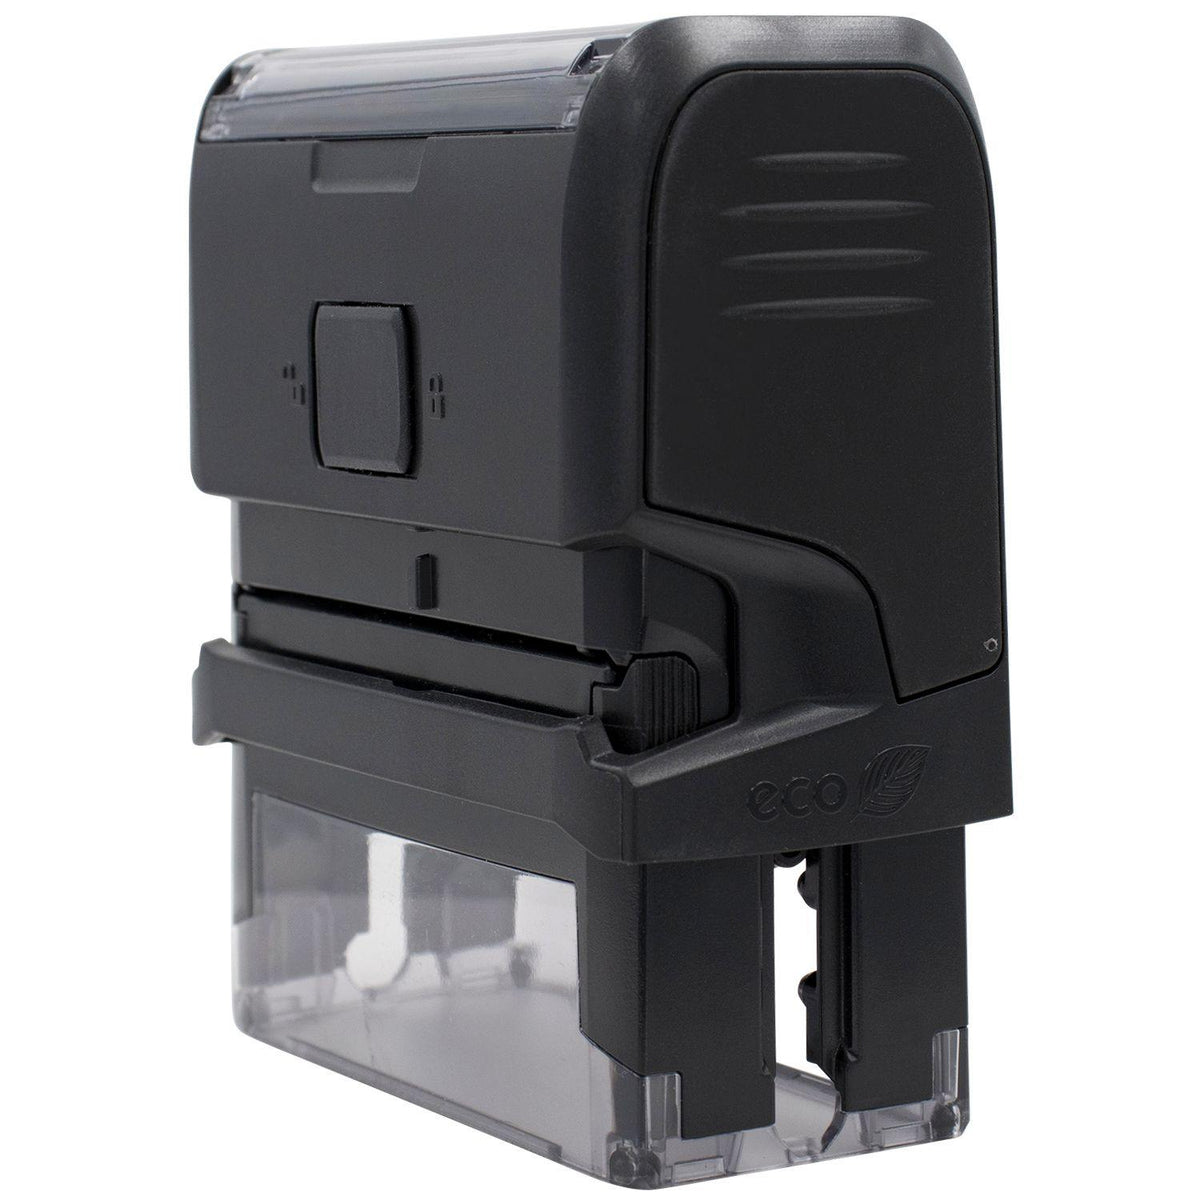 Large Self-Inking Outline Completed Stamp - Engineer Seal Stamps - Brand_Trodat, Impression Size_Large, Stamp Type_Self-Inking Stamp, Type of Use_Business, Type of Use_Office